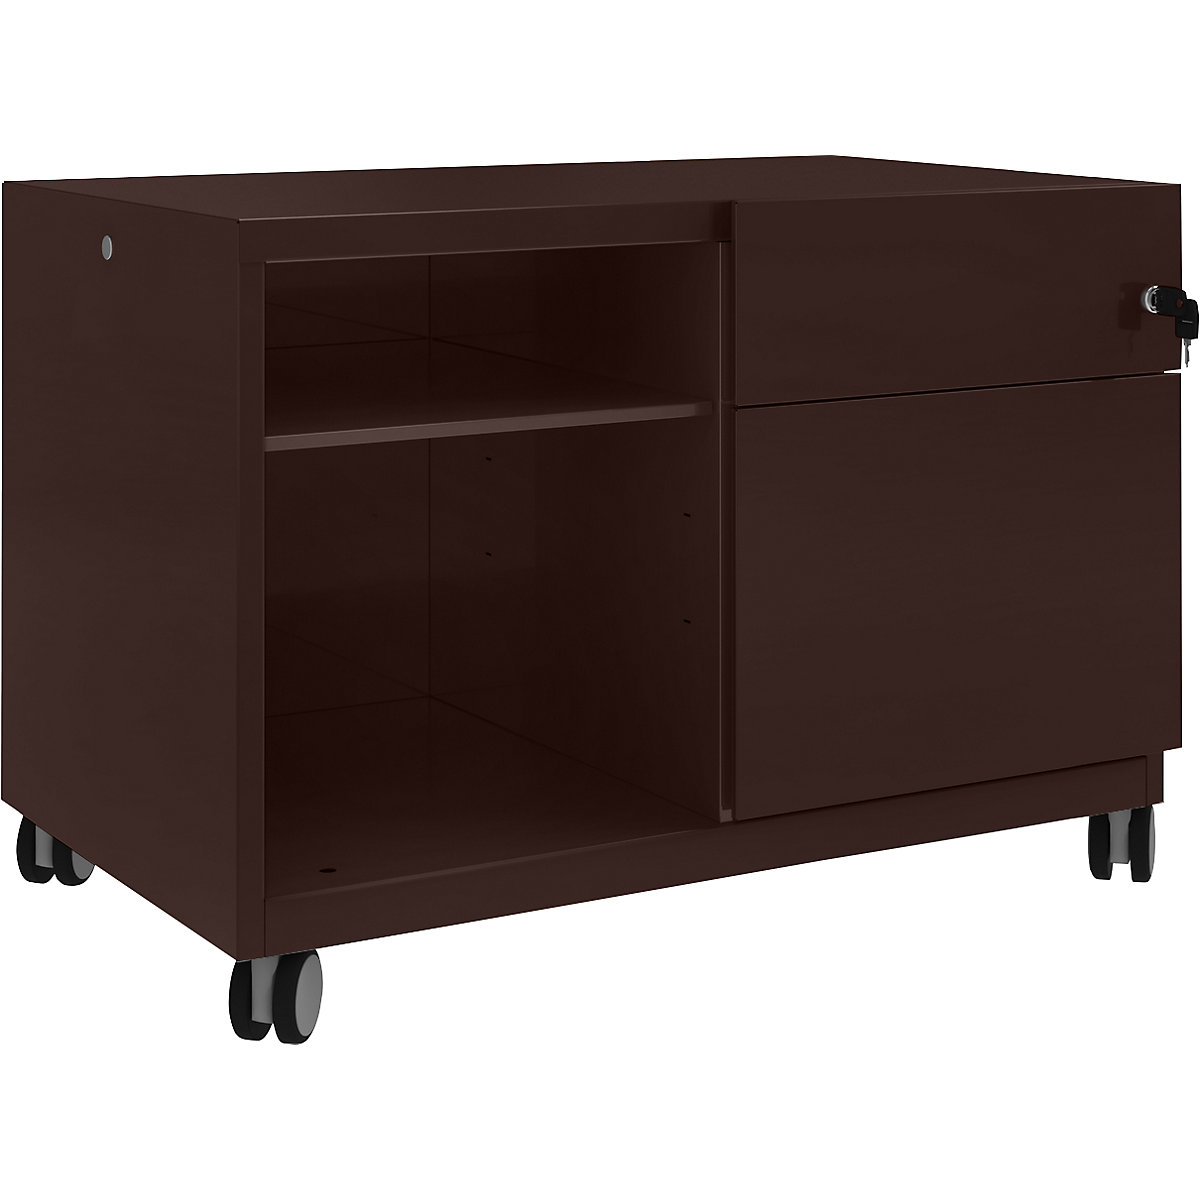 Note™ CADDY, HxBxT 563 x 800 x 490 mm – BISLEY, 1 universal drawer and suspension file drawer on the right, sepia brown-15